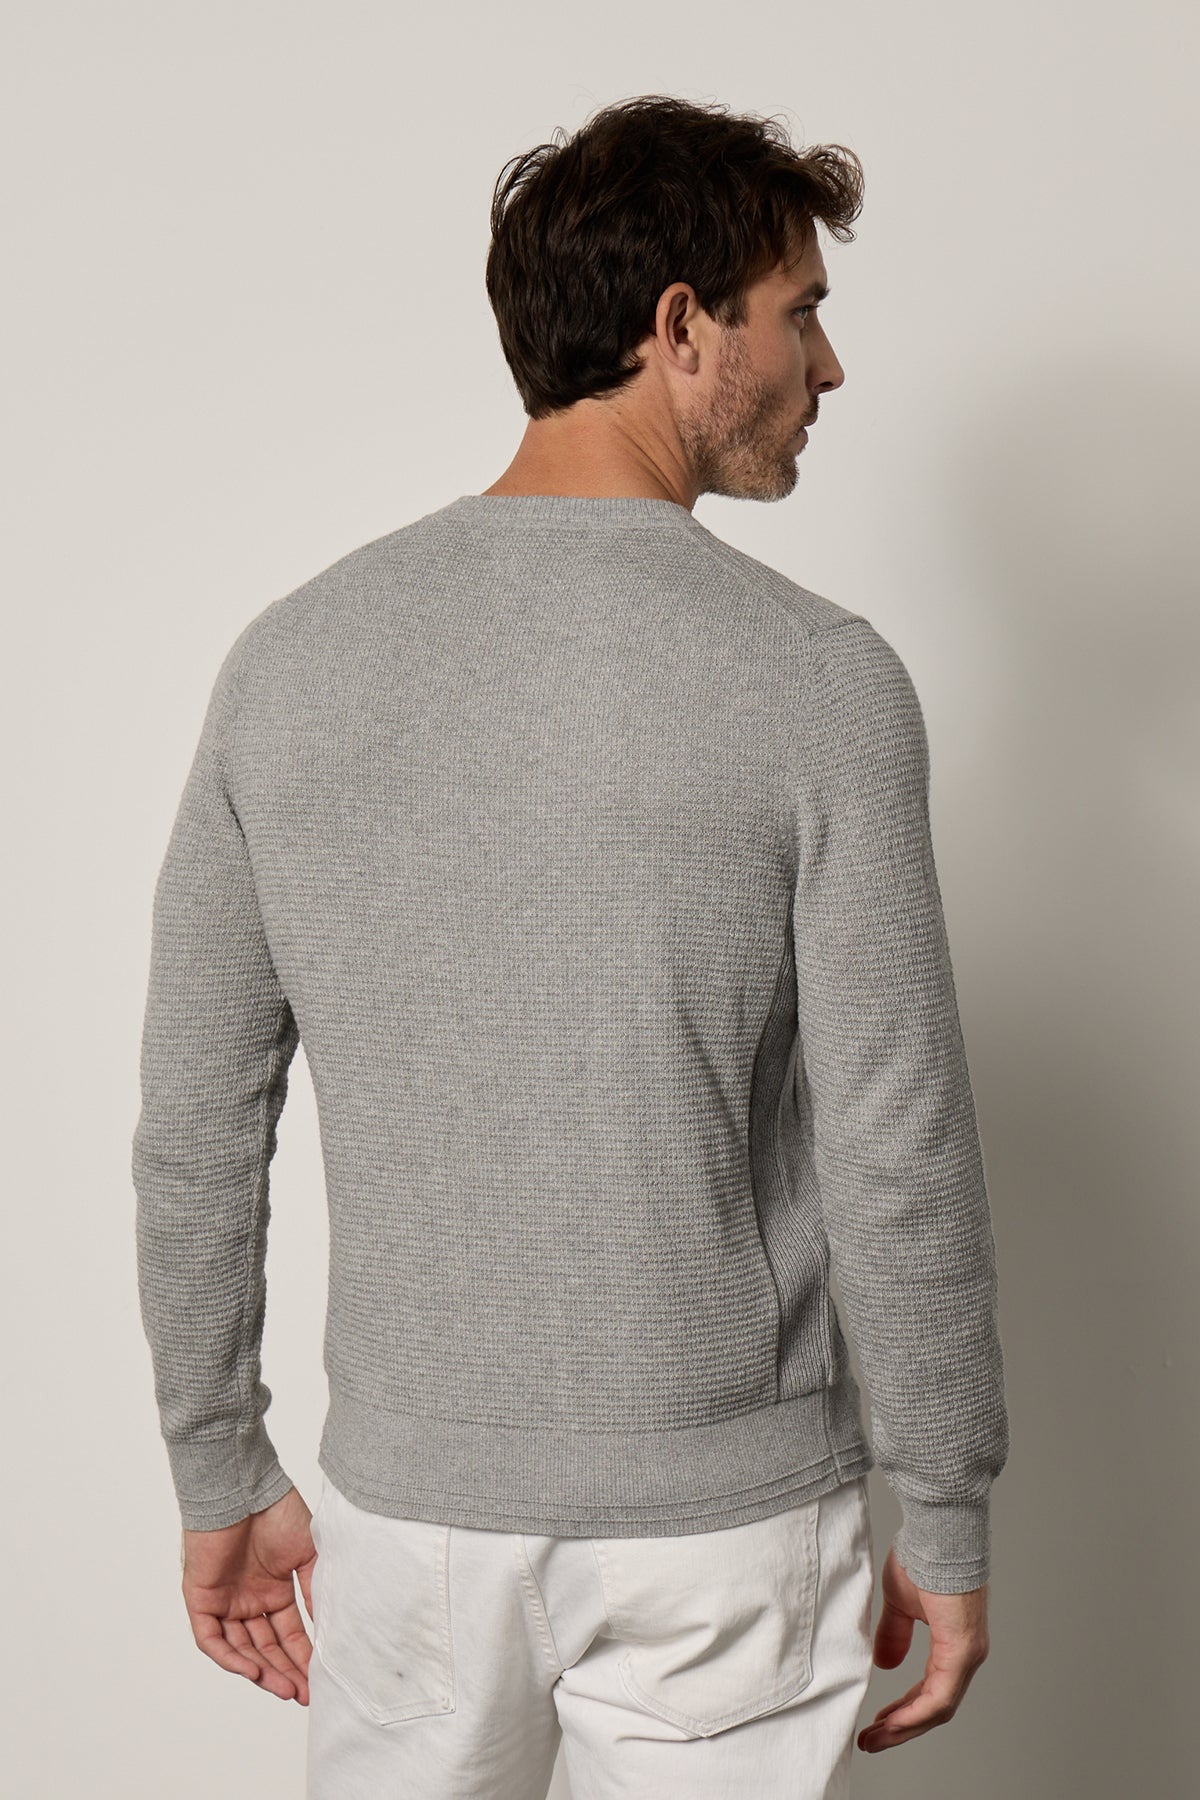   Ace Thermal Crew in heather grey with white denim back 